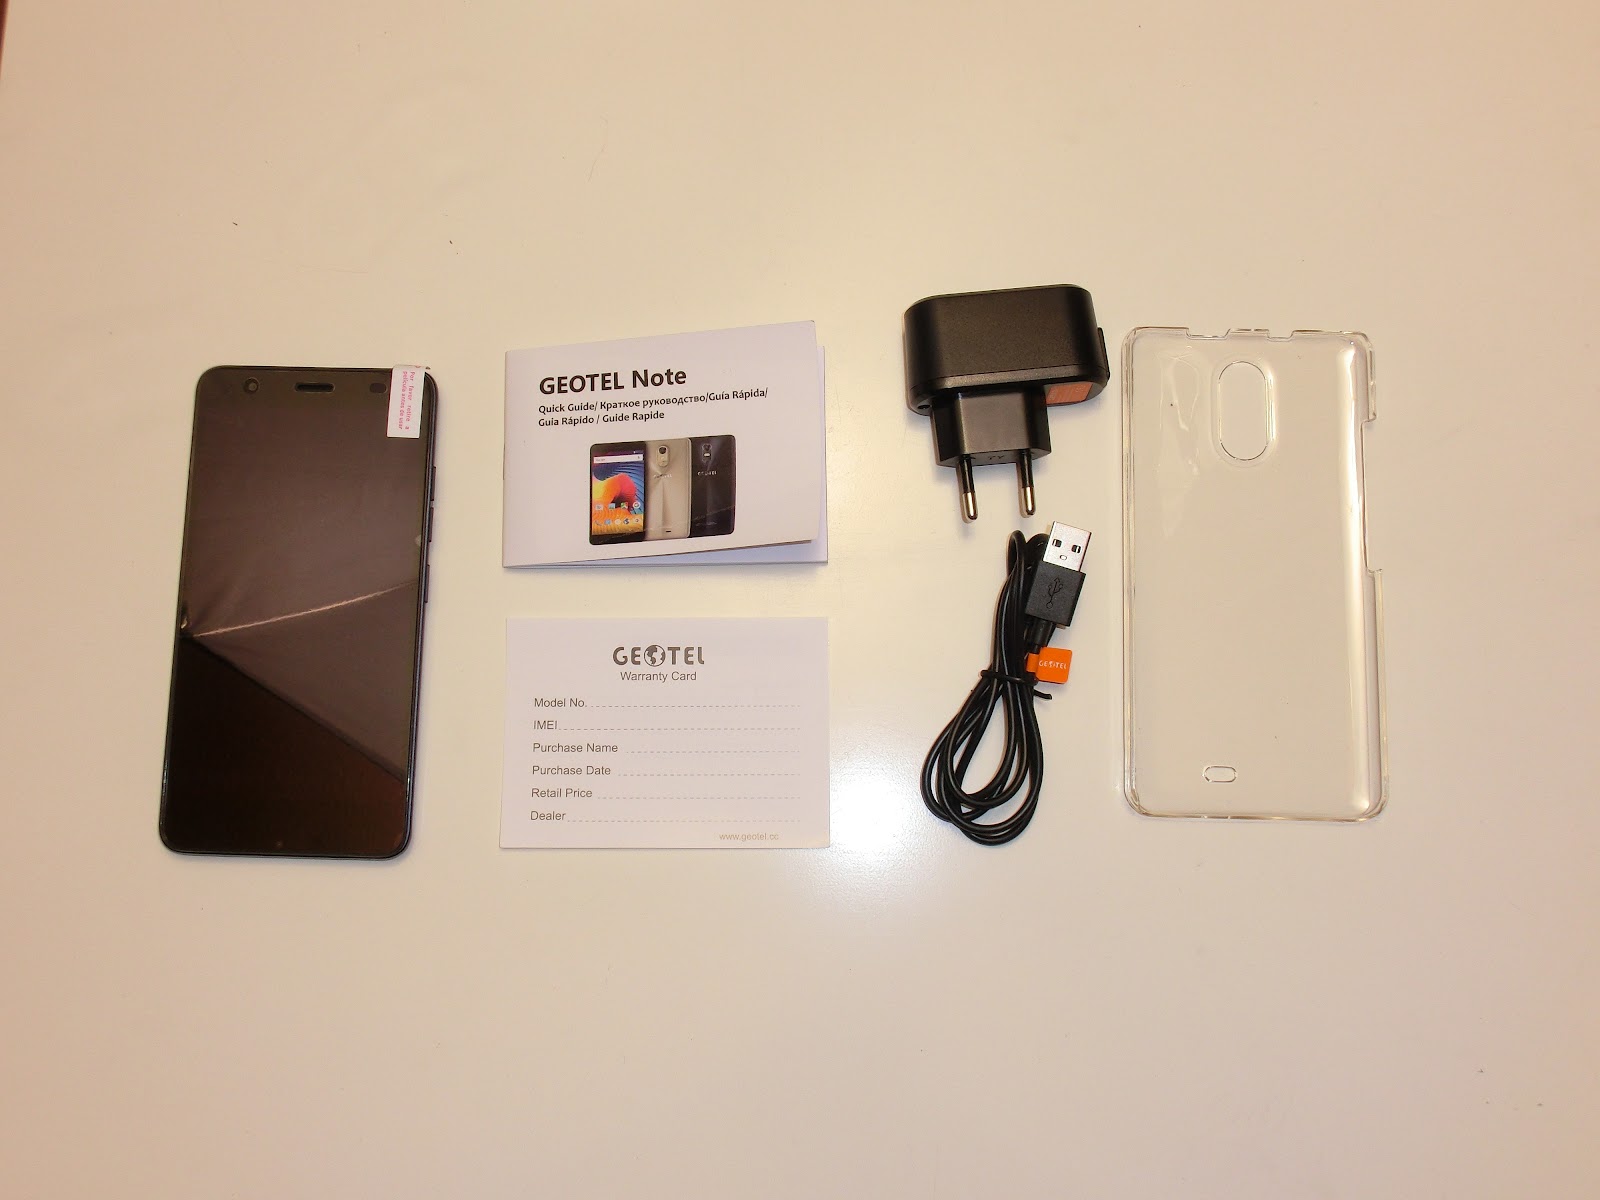 [REVIEW] Geotel Note (Smartphone)